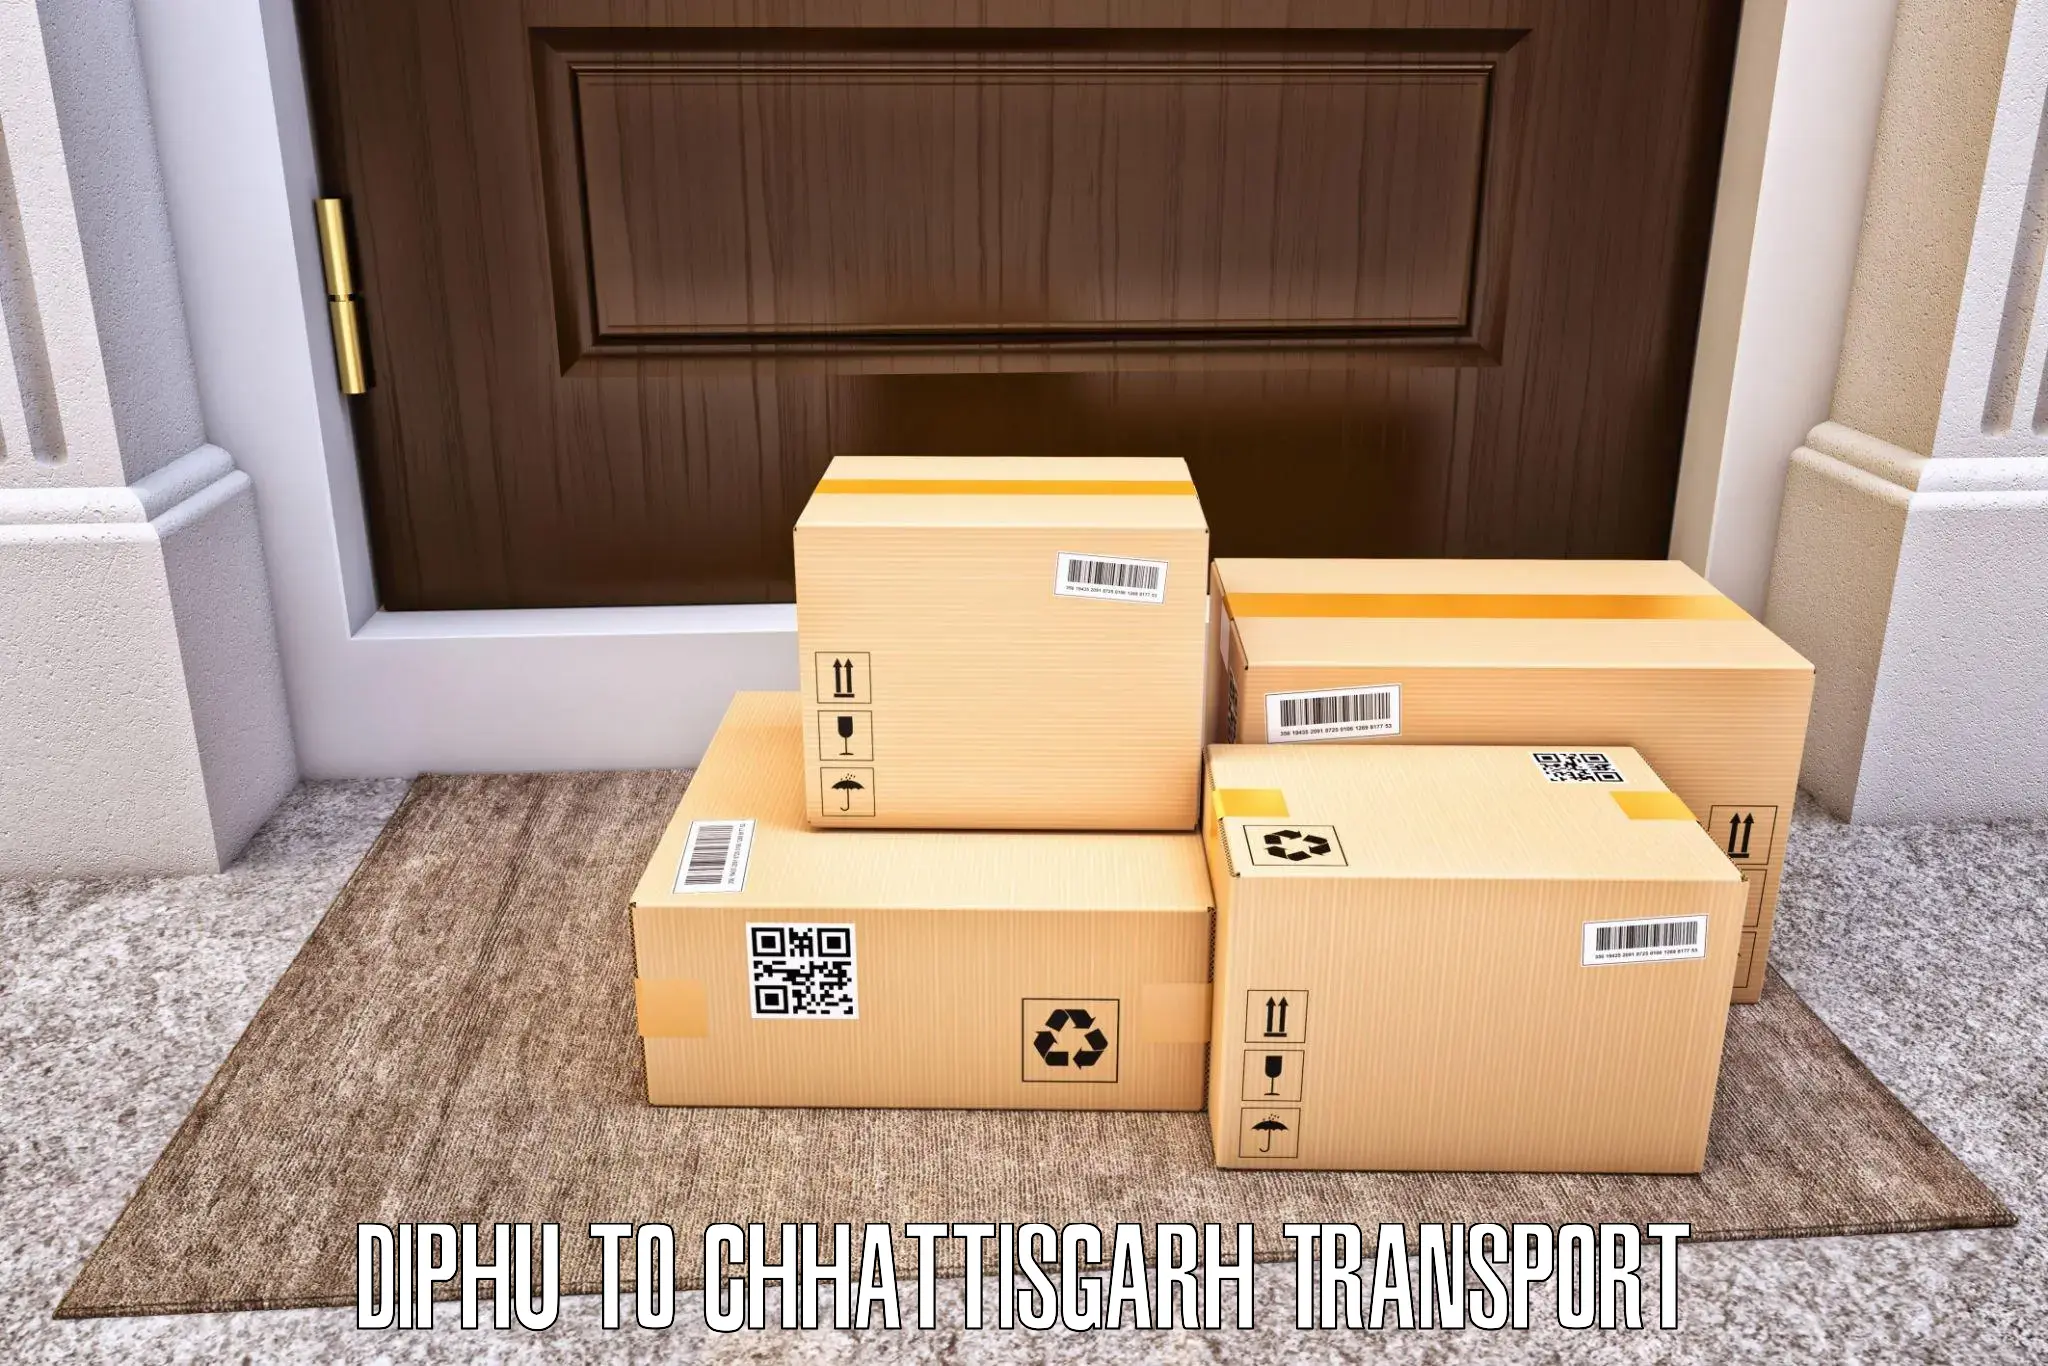 Road transport online services Diphu to Sirpur